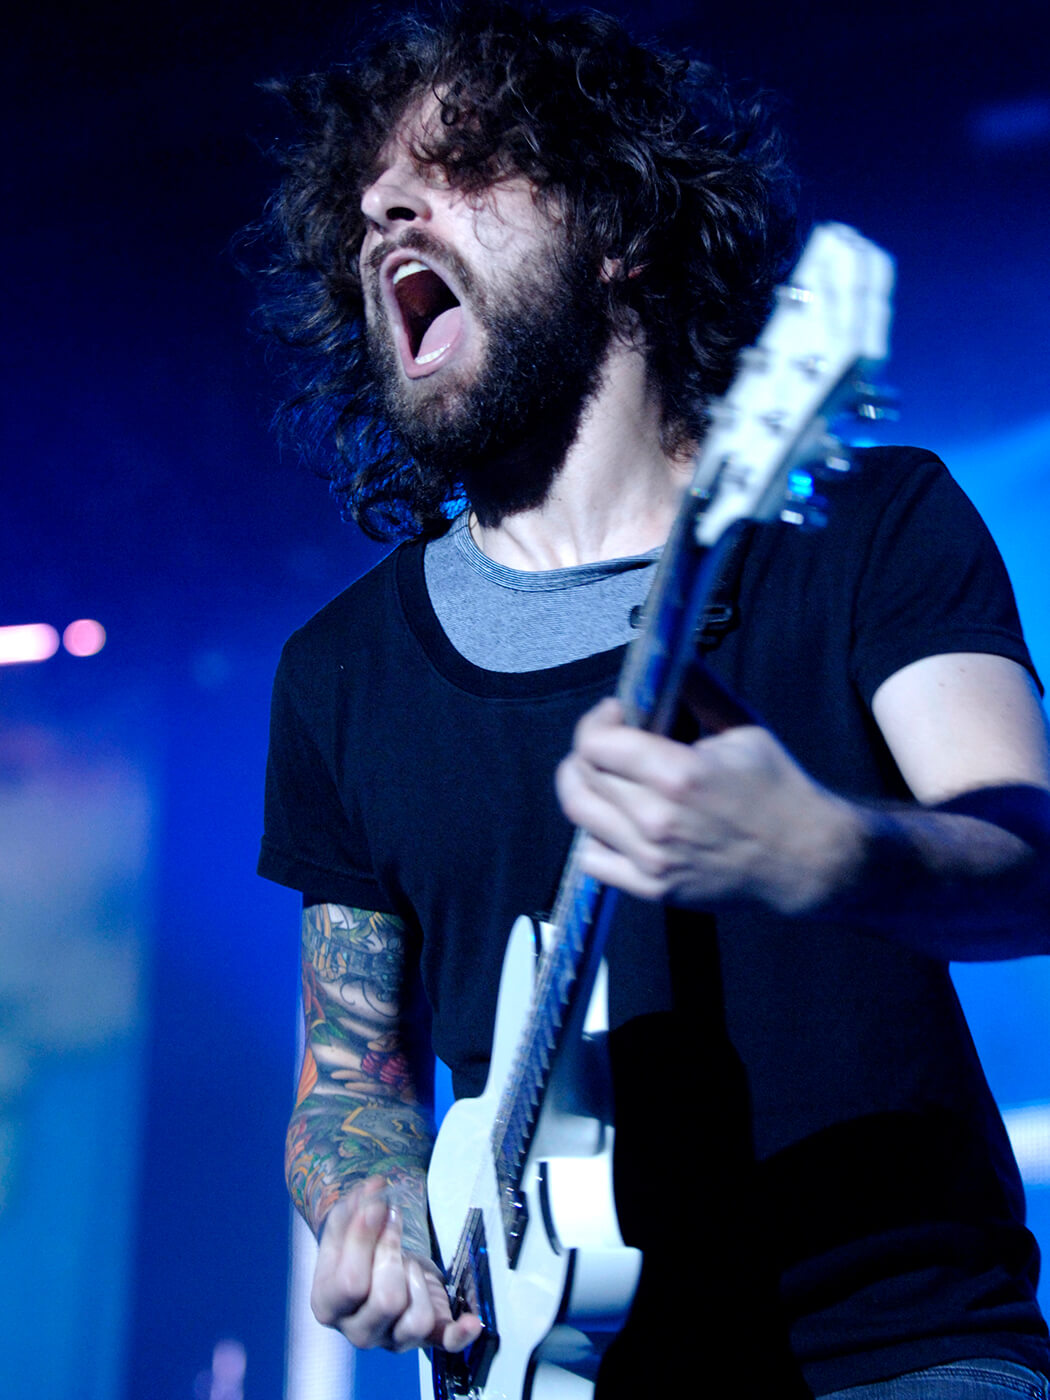 Joe Trohman of Fall Out Boy performing in San Jose, California, during the “The Young Wild Things Tour”, by Tim Mosenfelder/Getty Images